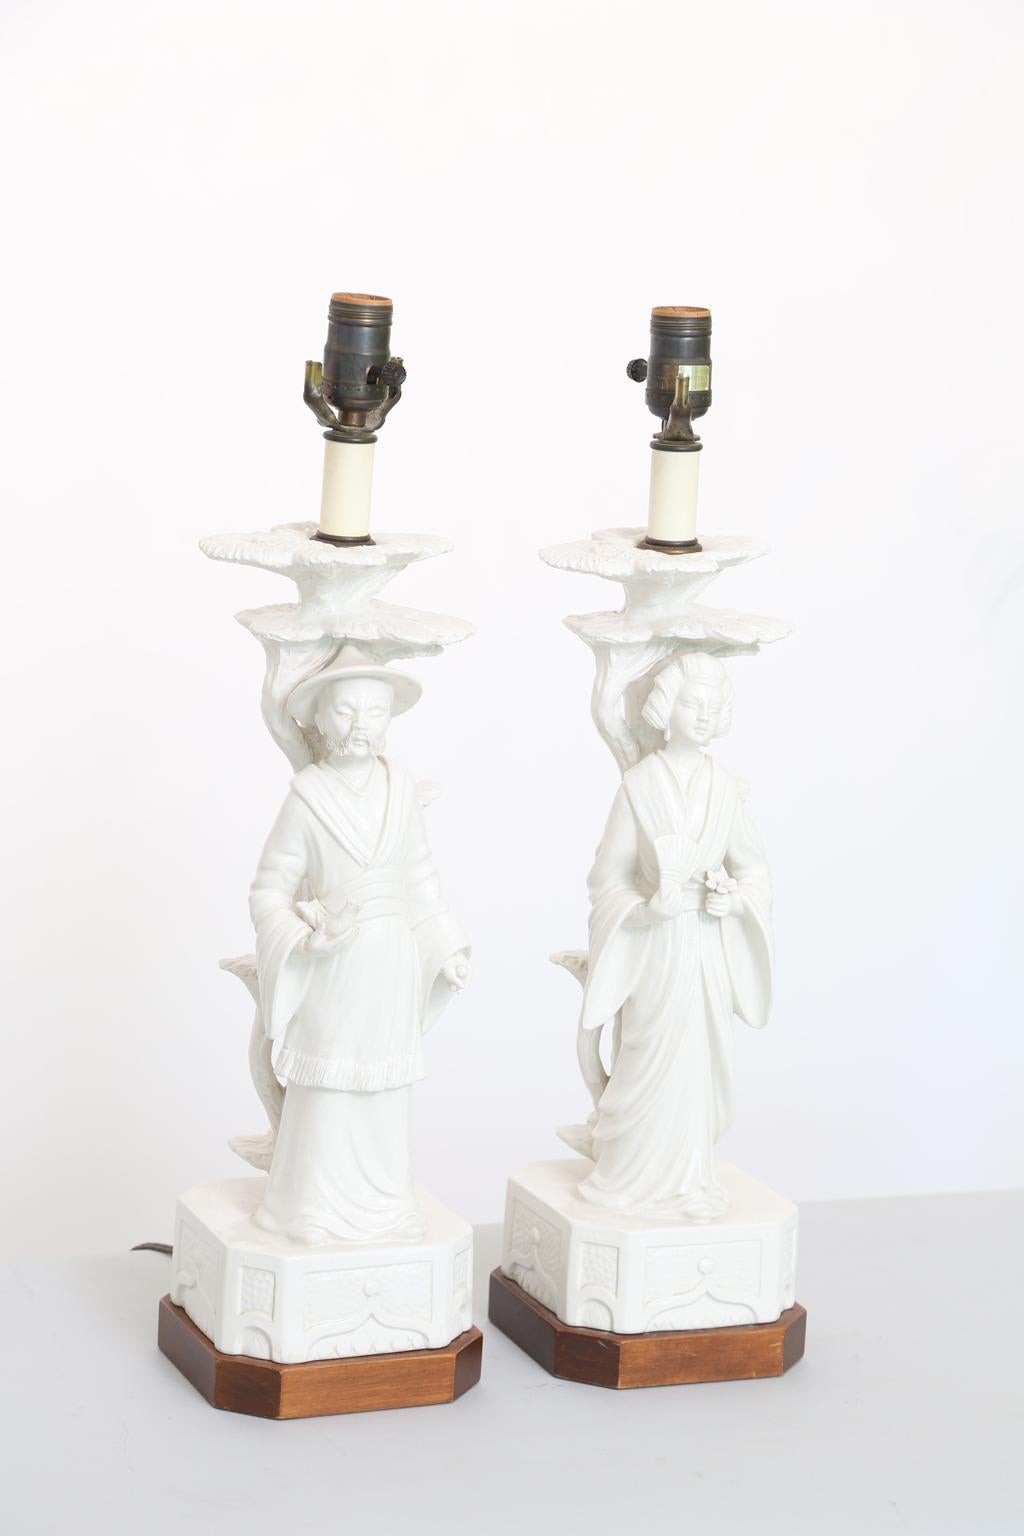 Pair of figural lamps, of Blanc de Chine style pottery, one a male in traditional dress holding a bird, the female holding a fan and lotus blossom, on square wooden base with canted corners. By Fredrick Cooper. 

Stock ID: D2675.